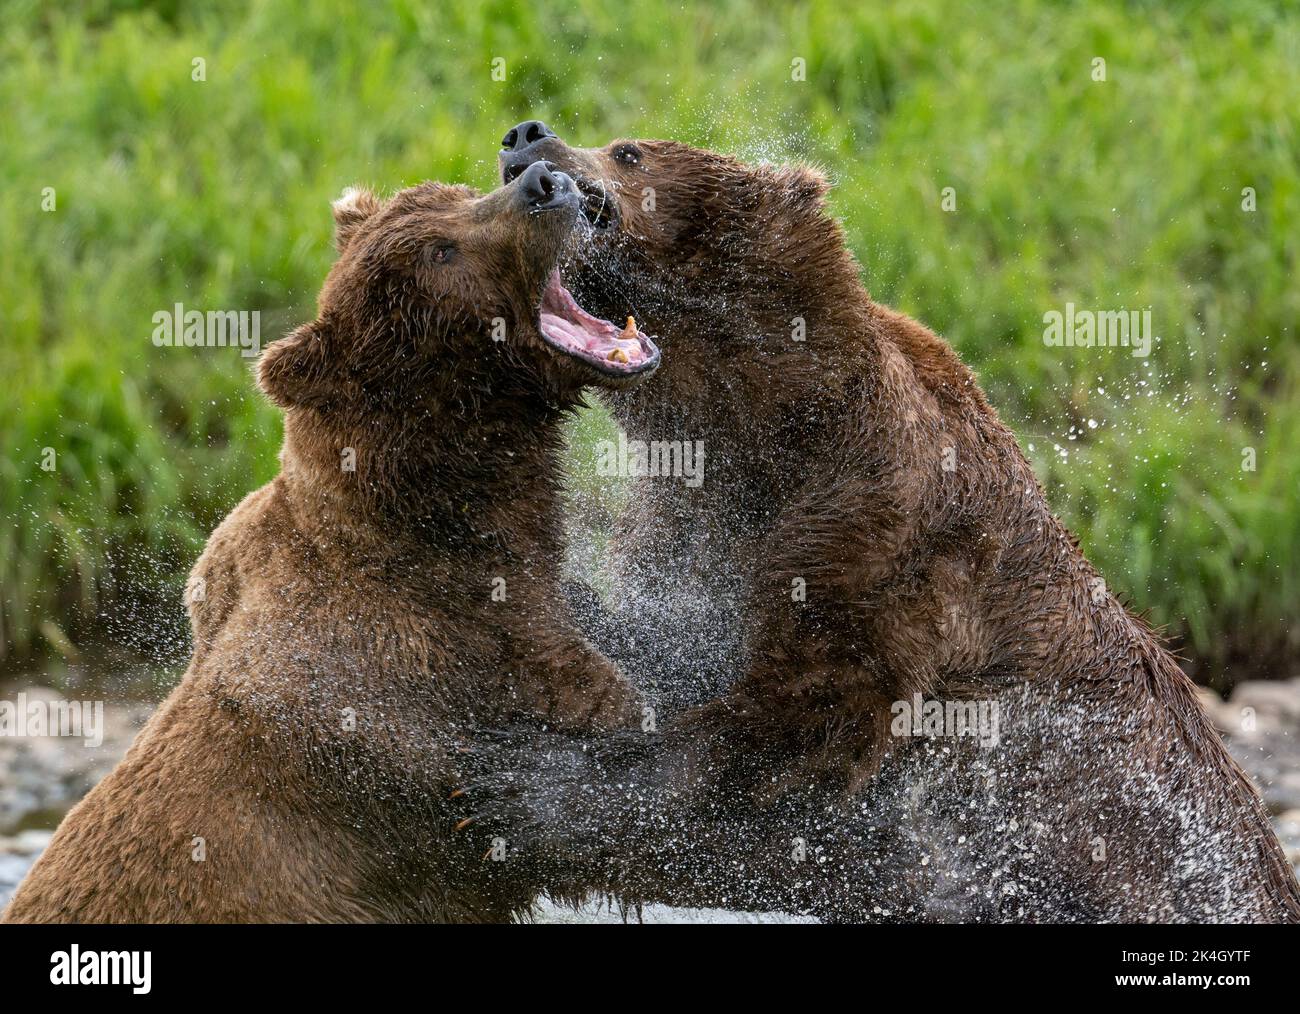 Two adult Alaskan brown locked in an intense battle along a shallow creek Stock Photo